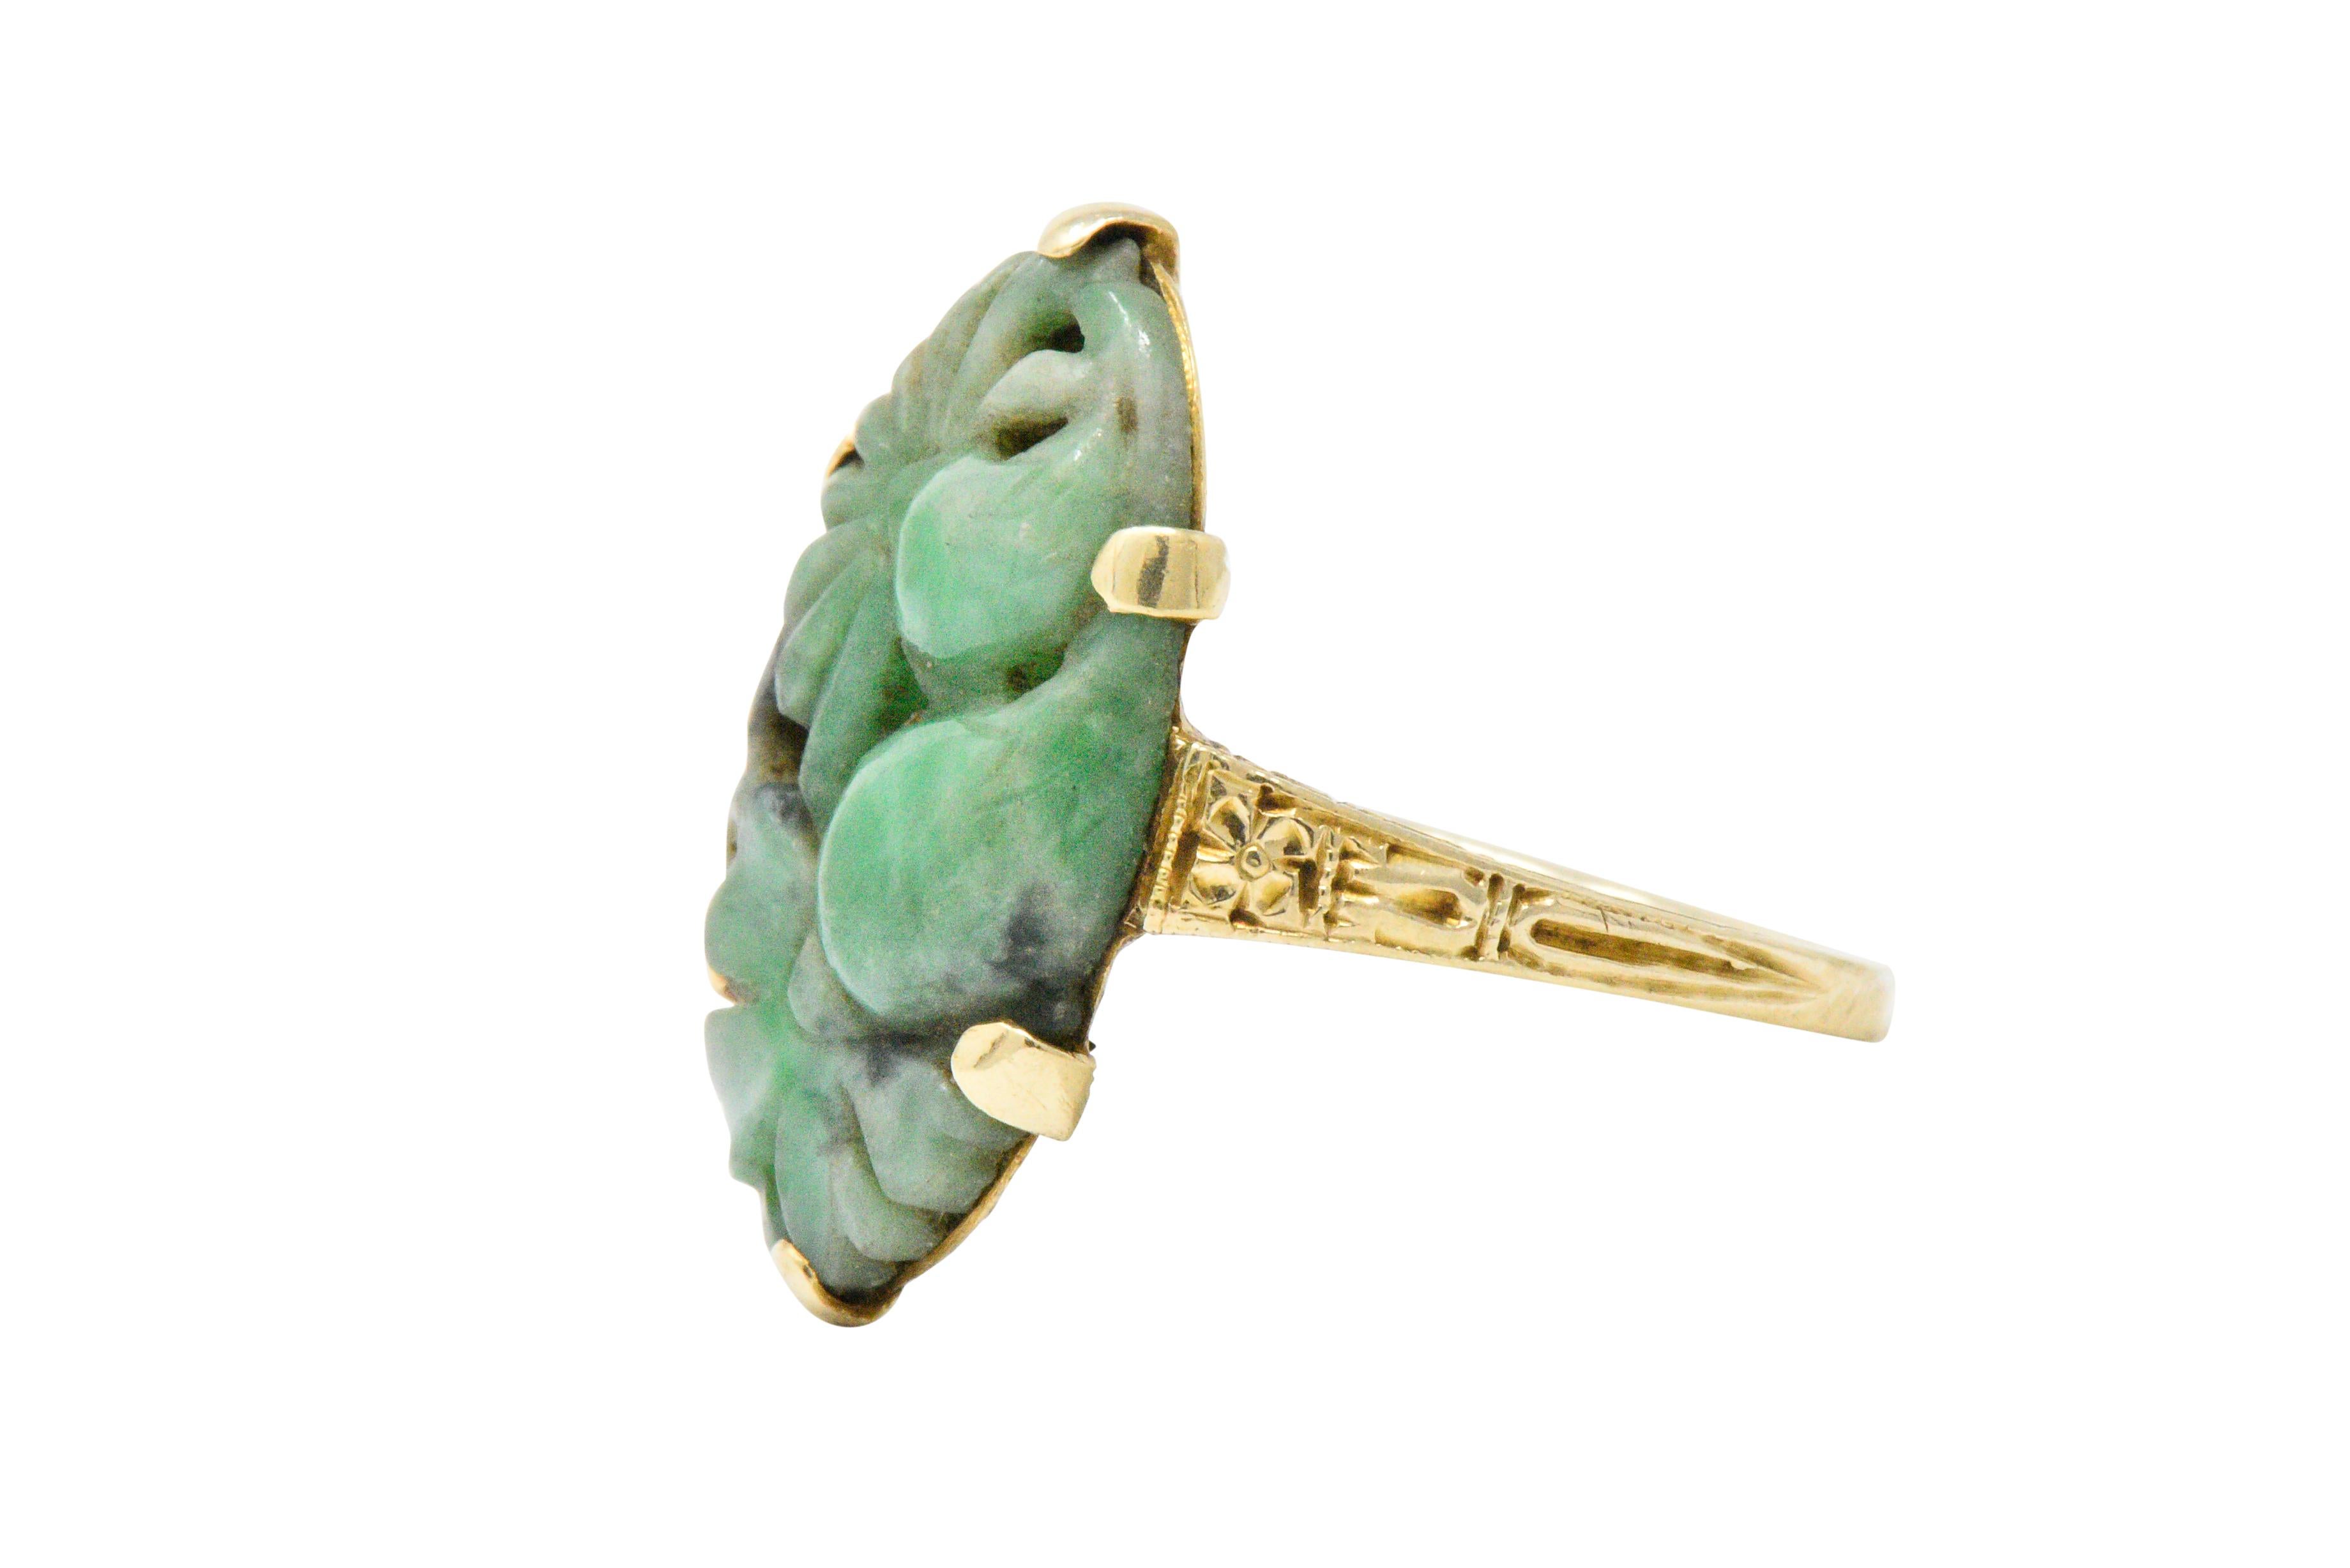 Centering a mottled green oval jade with foliate motif carving

Prong set with intricate hand engraved gold under the jade and part-way. does the shank

The ring is stamped 